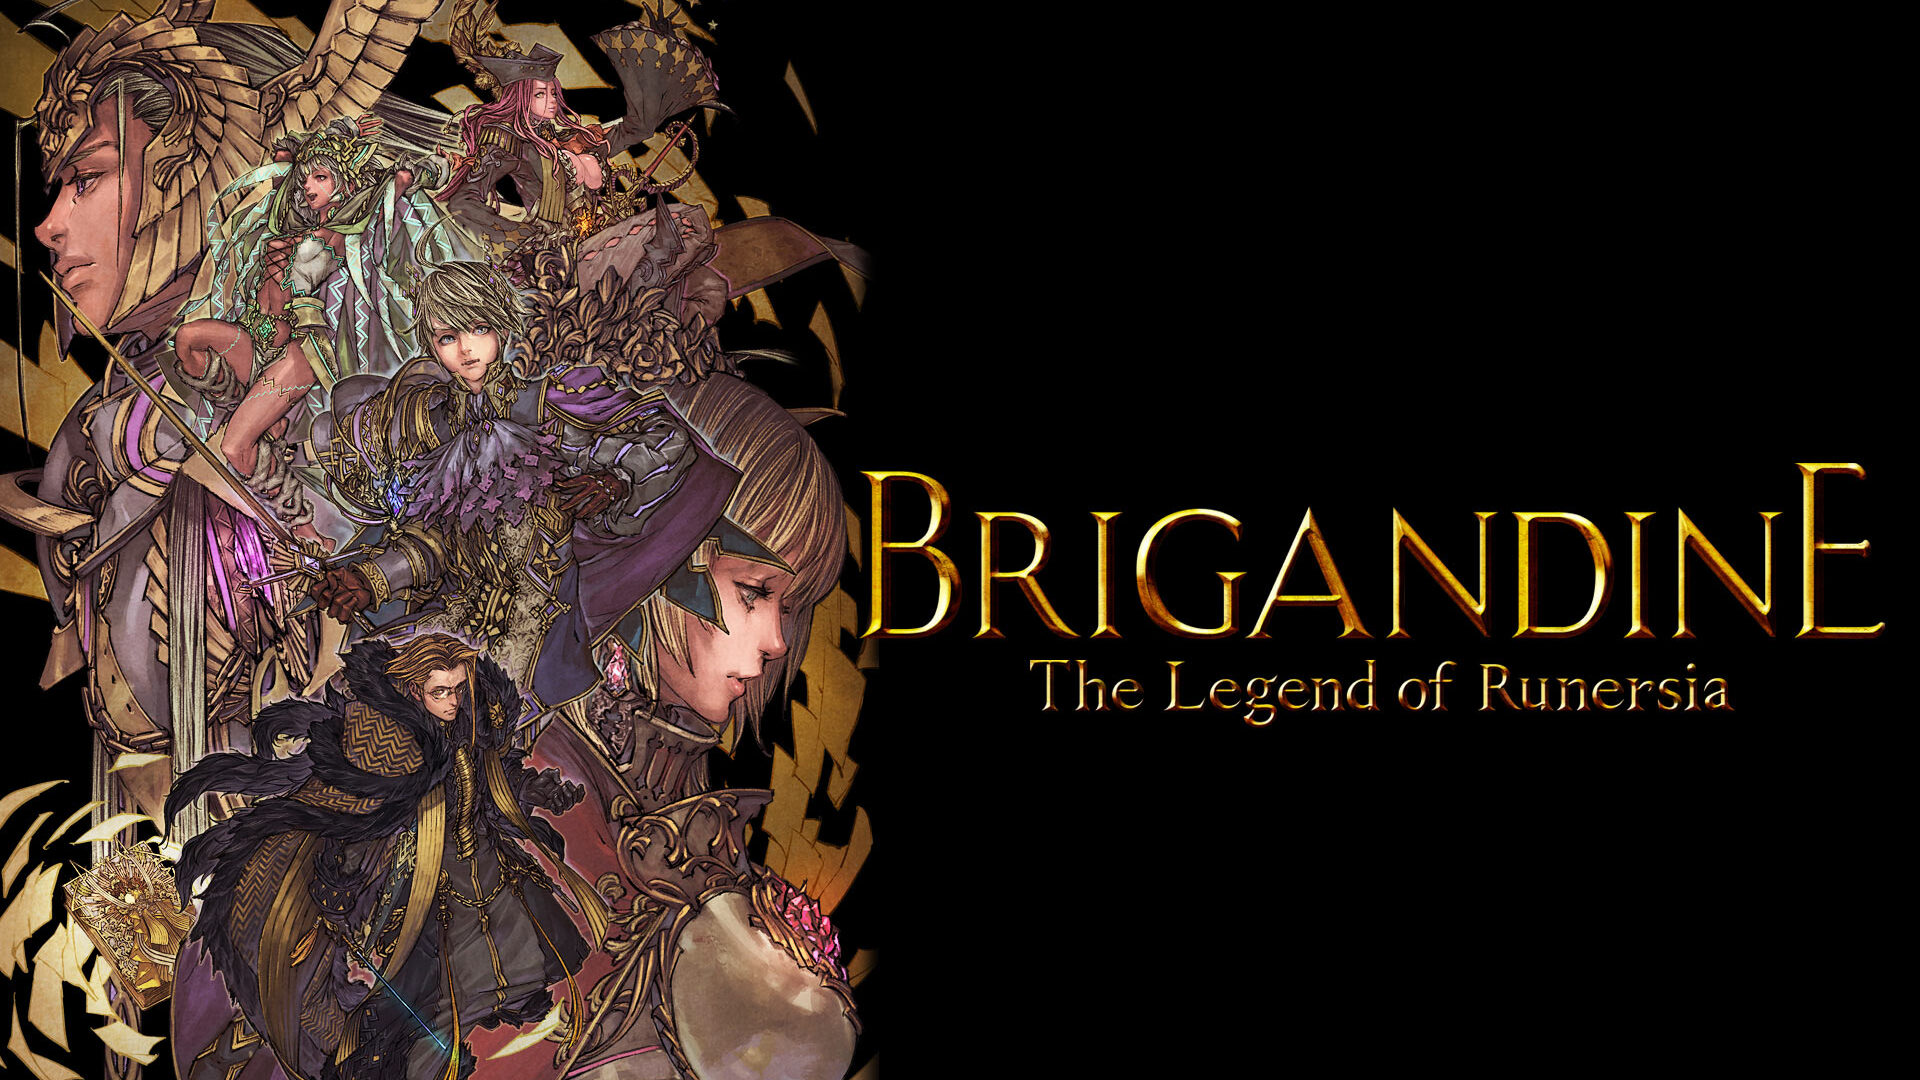 Brigandine: The Legend of Runersia is out now for PC via Steam